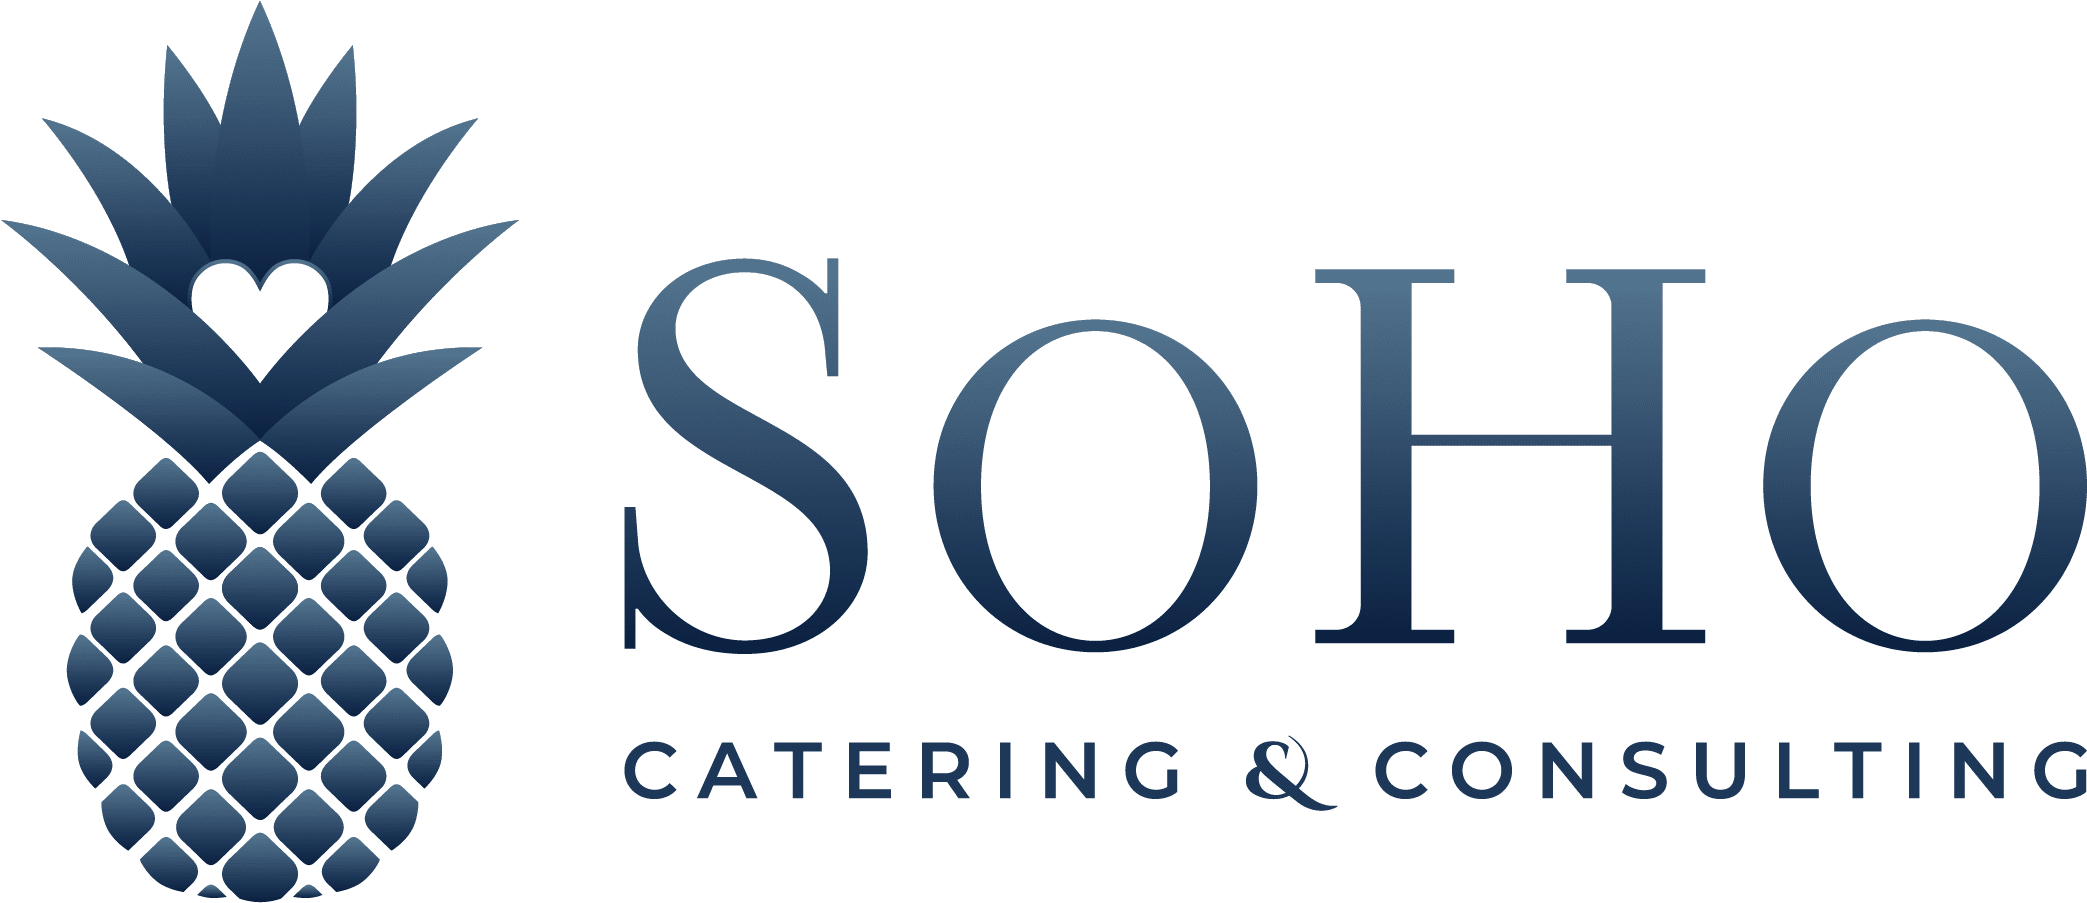 SoHo Catering & Consulting Logo Blue